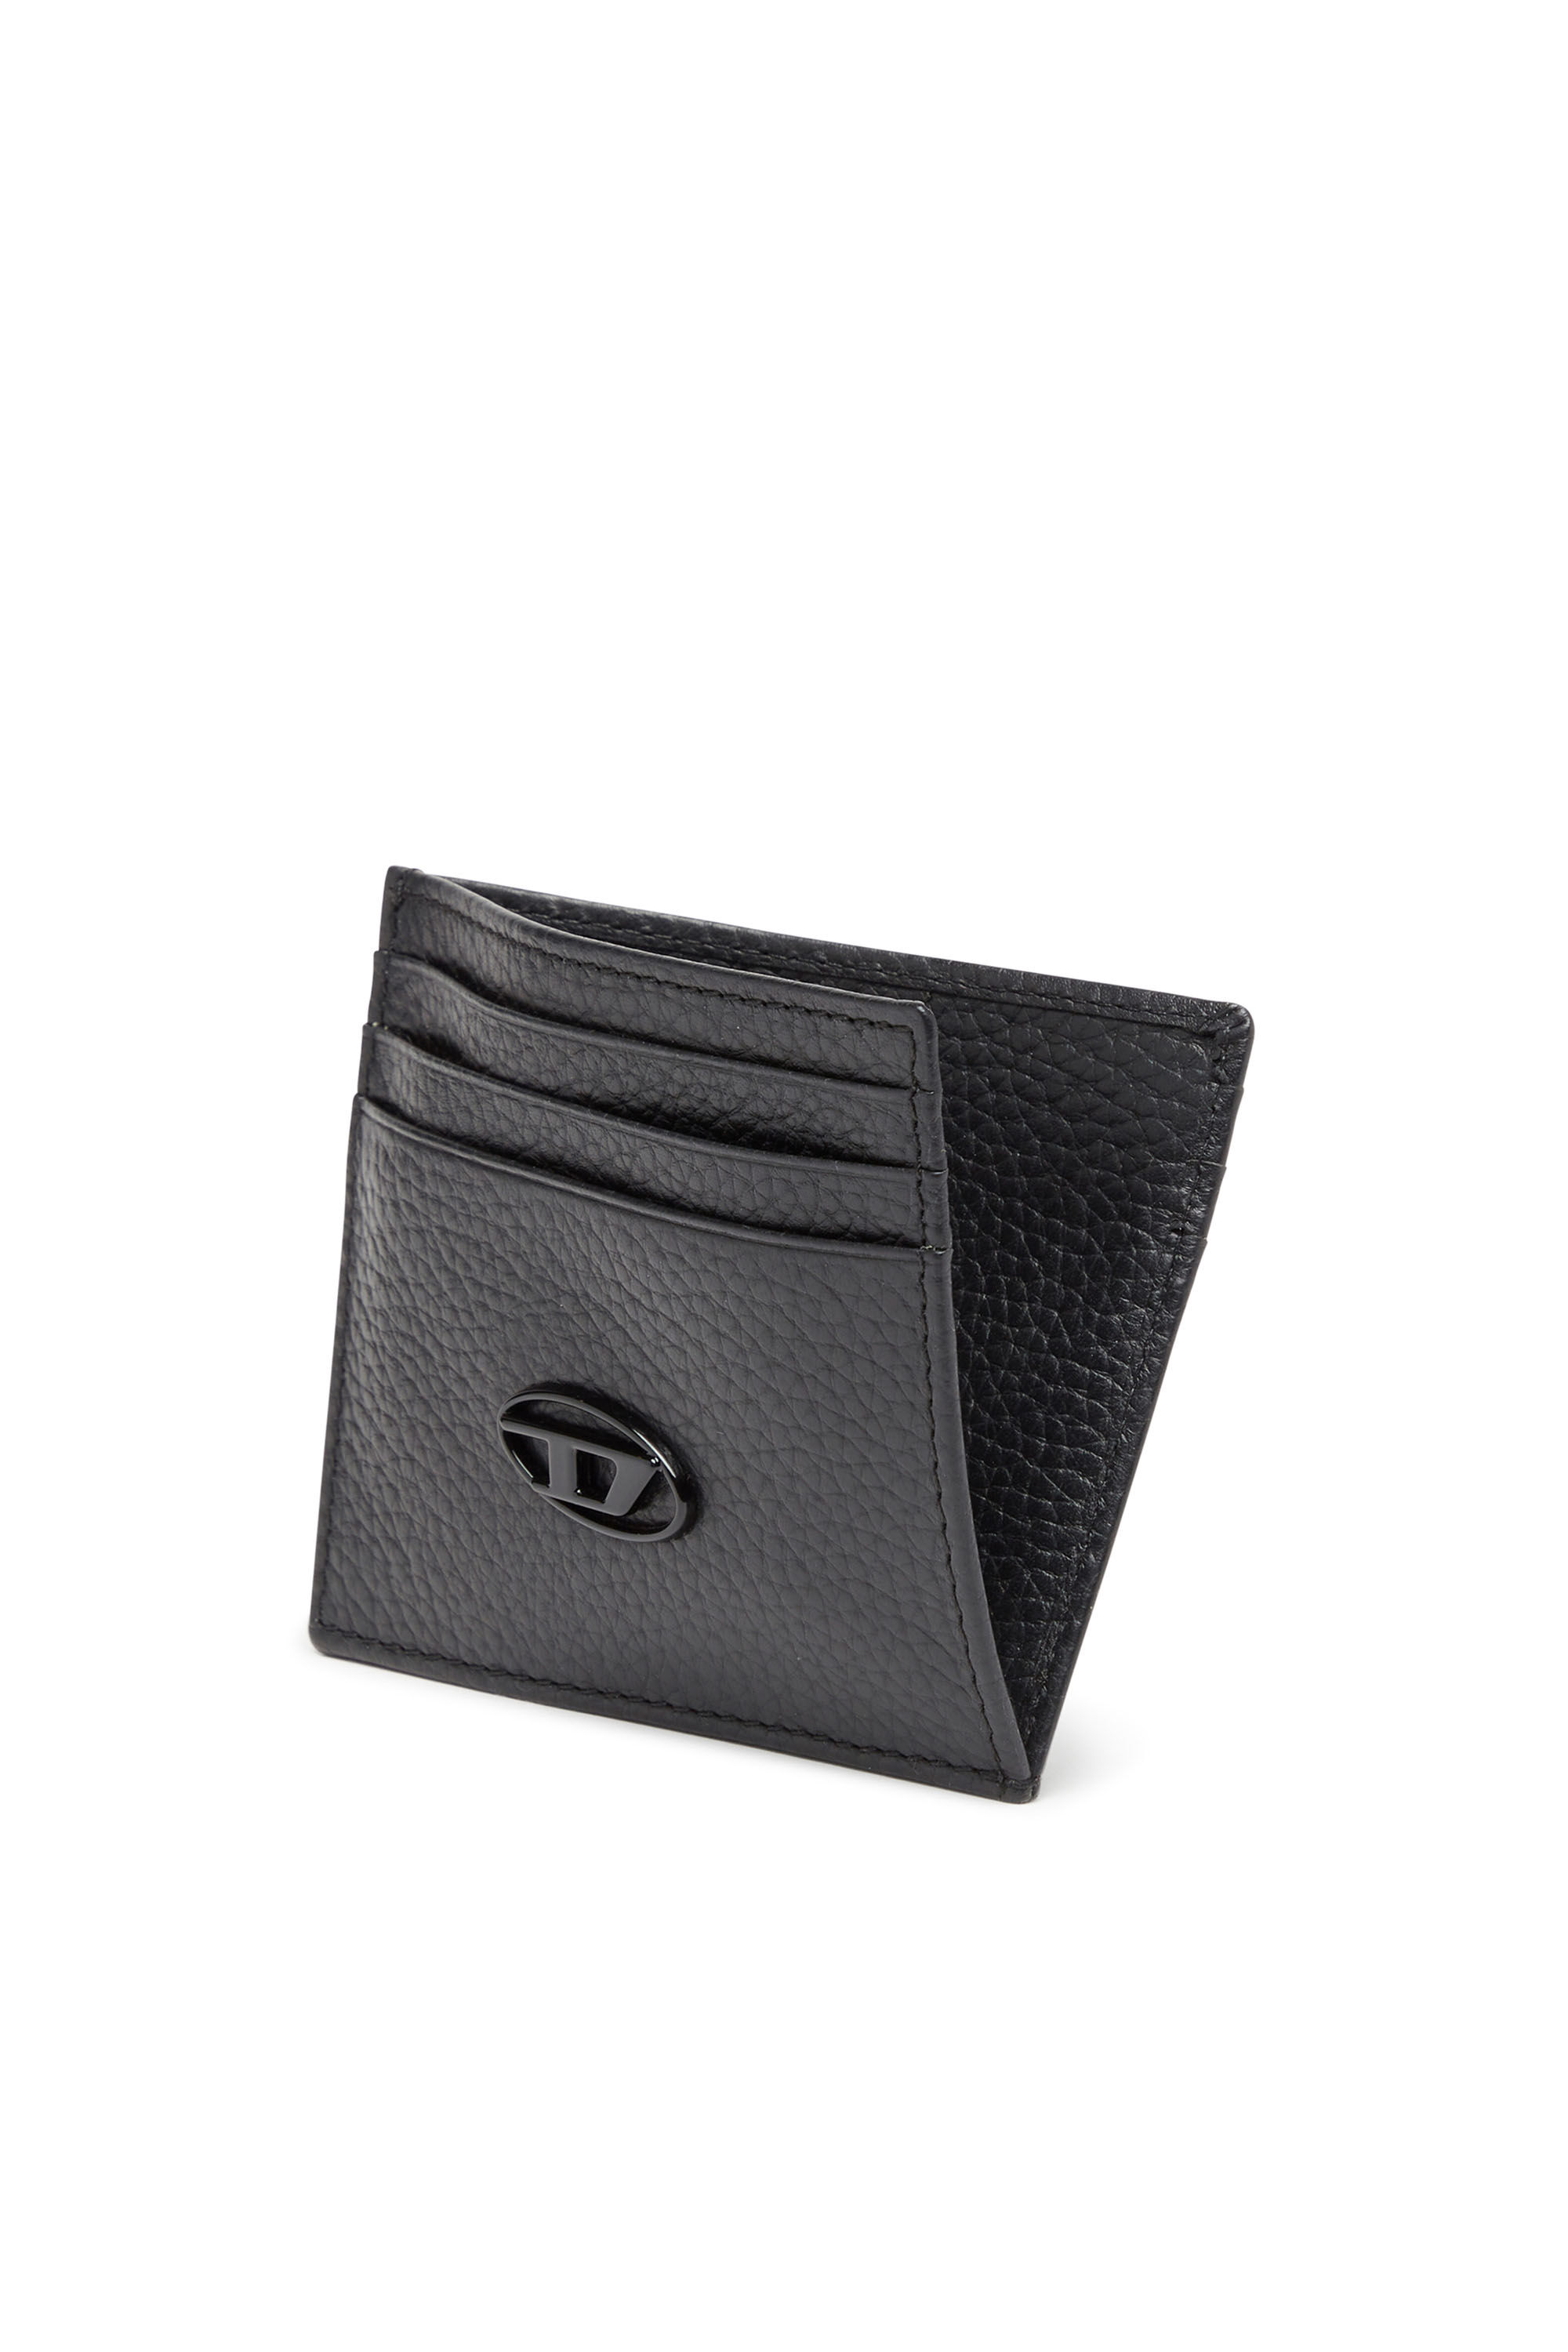 Diesel - CARD CASE, Man Card case in grained leather in Black - Image 3